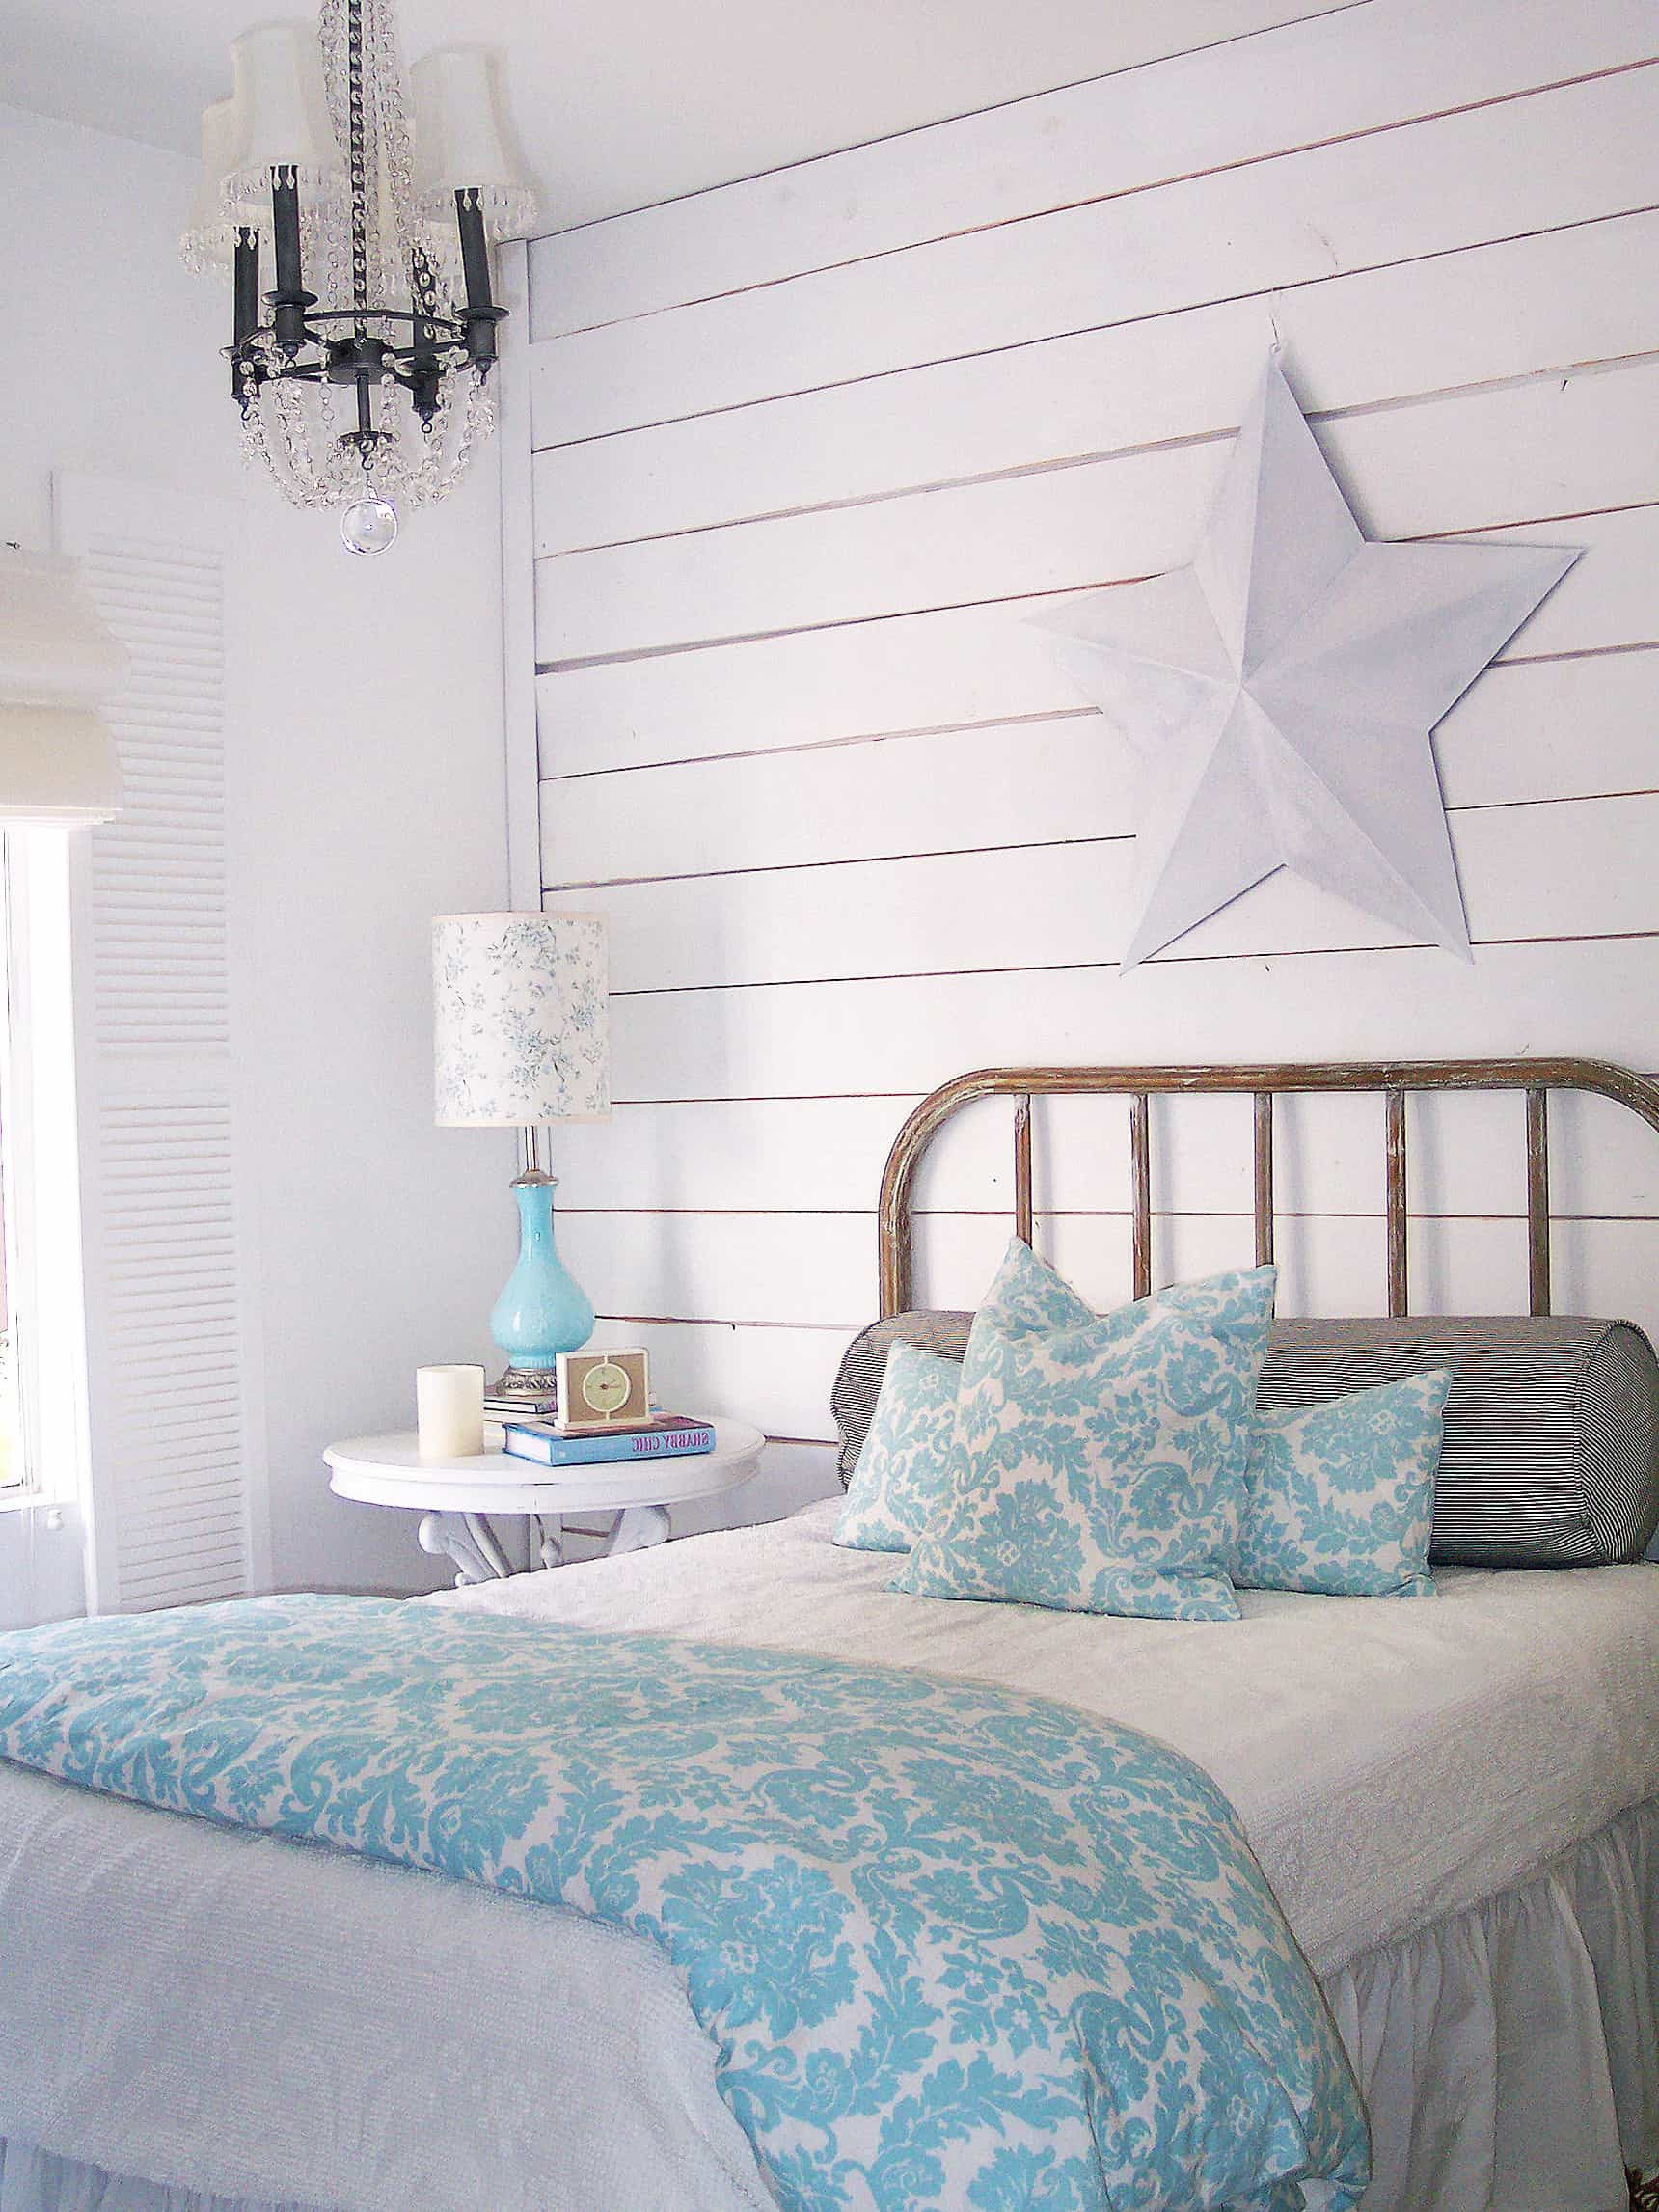 Modern Chic Bedroom
 How To Decorate A Shabby Chic Bedroom